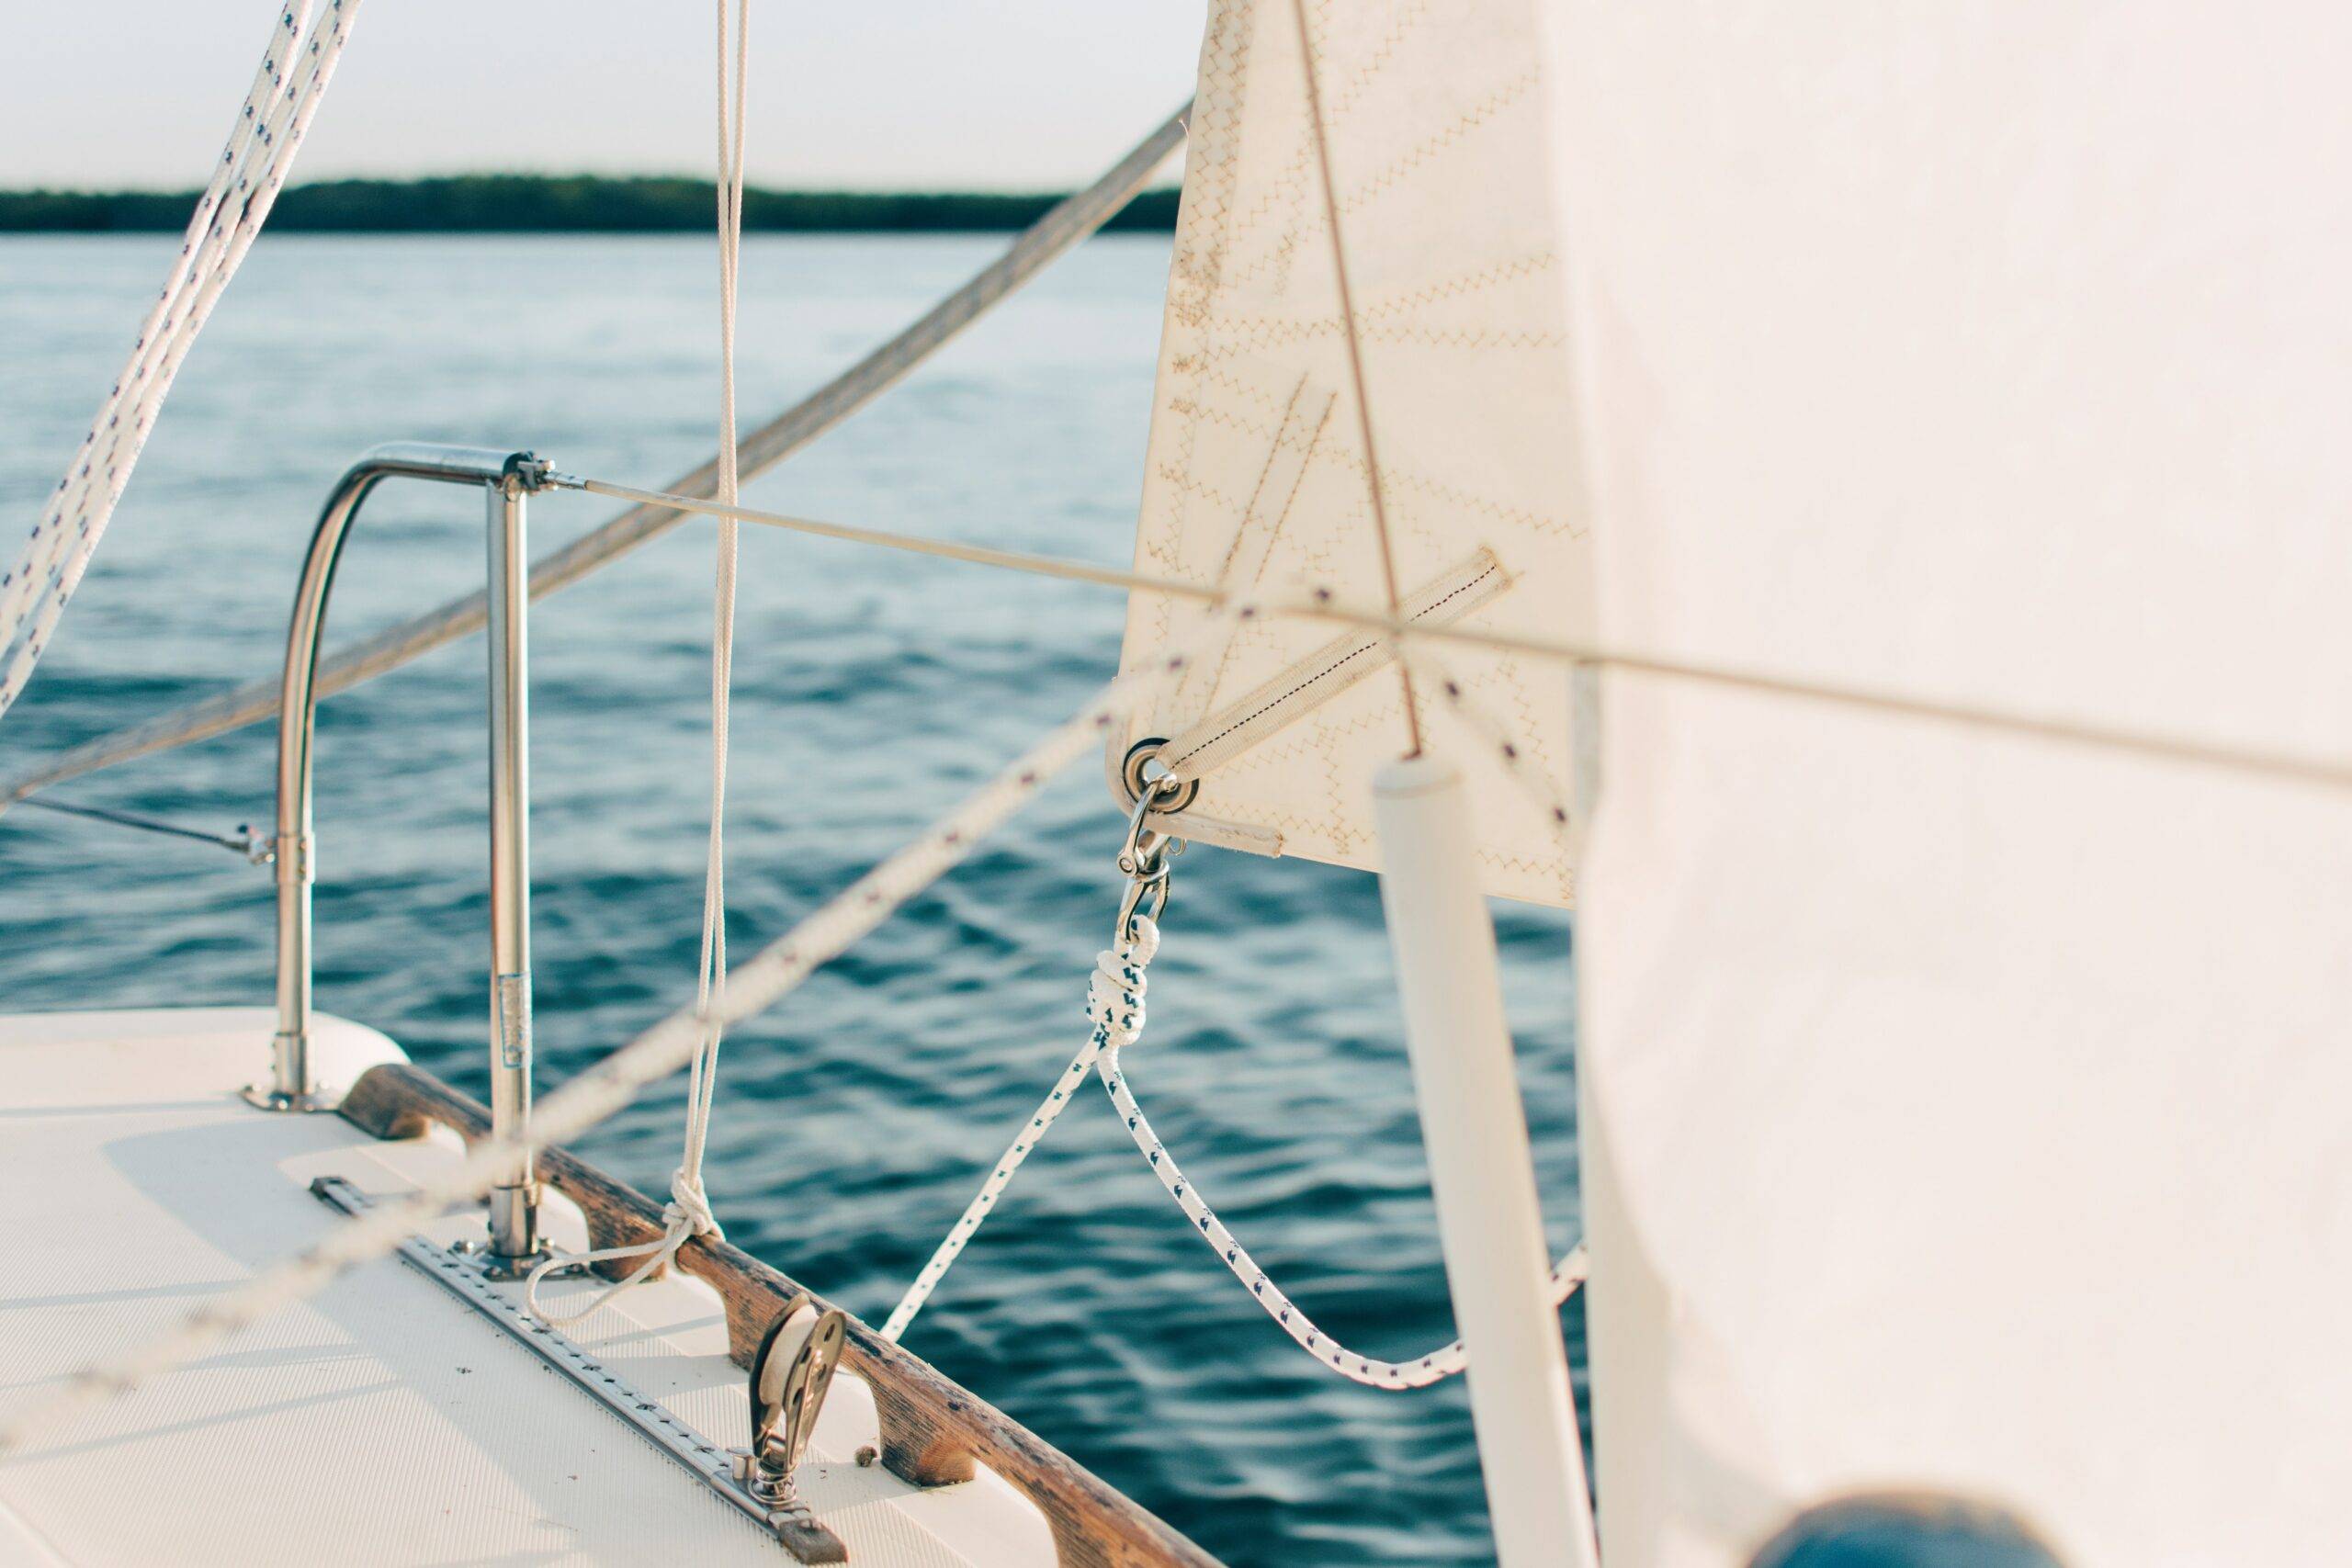 Take to the helm and set sail into your UK summer holiday with Click&Boat